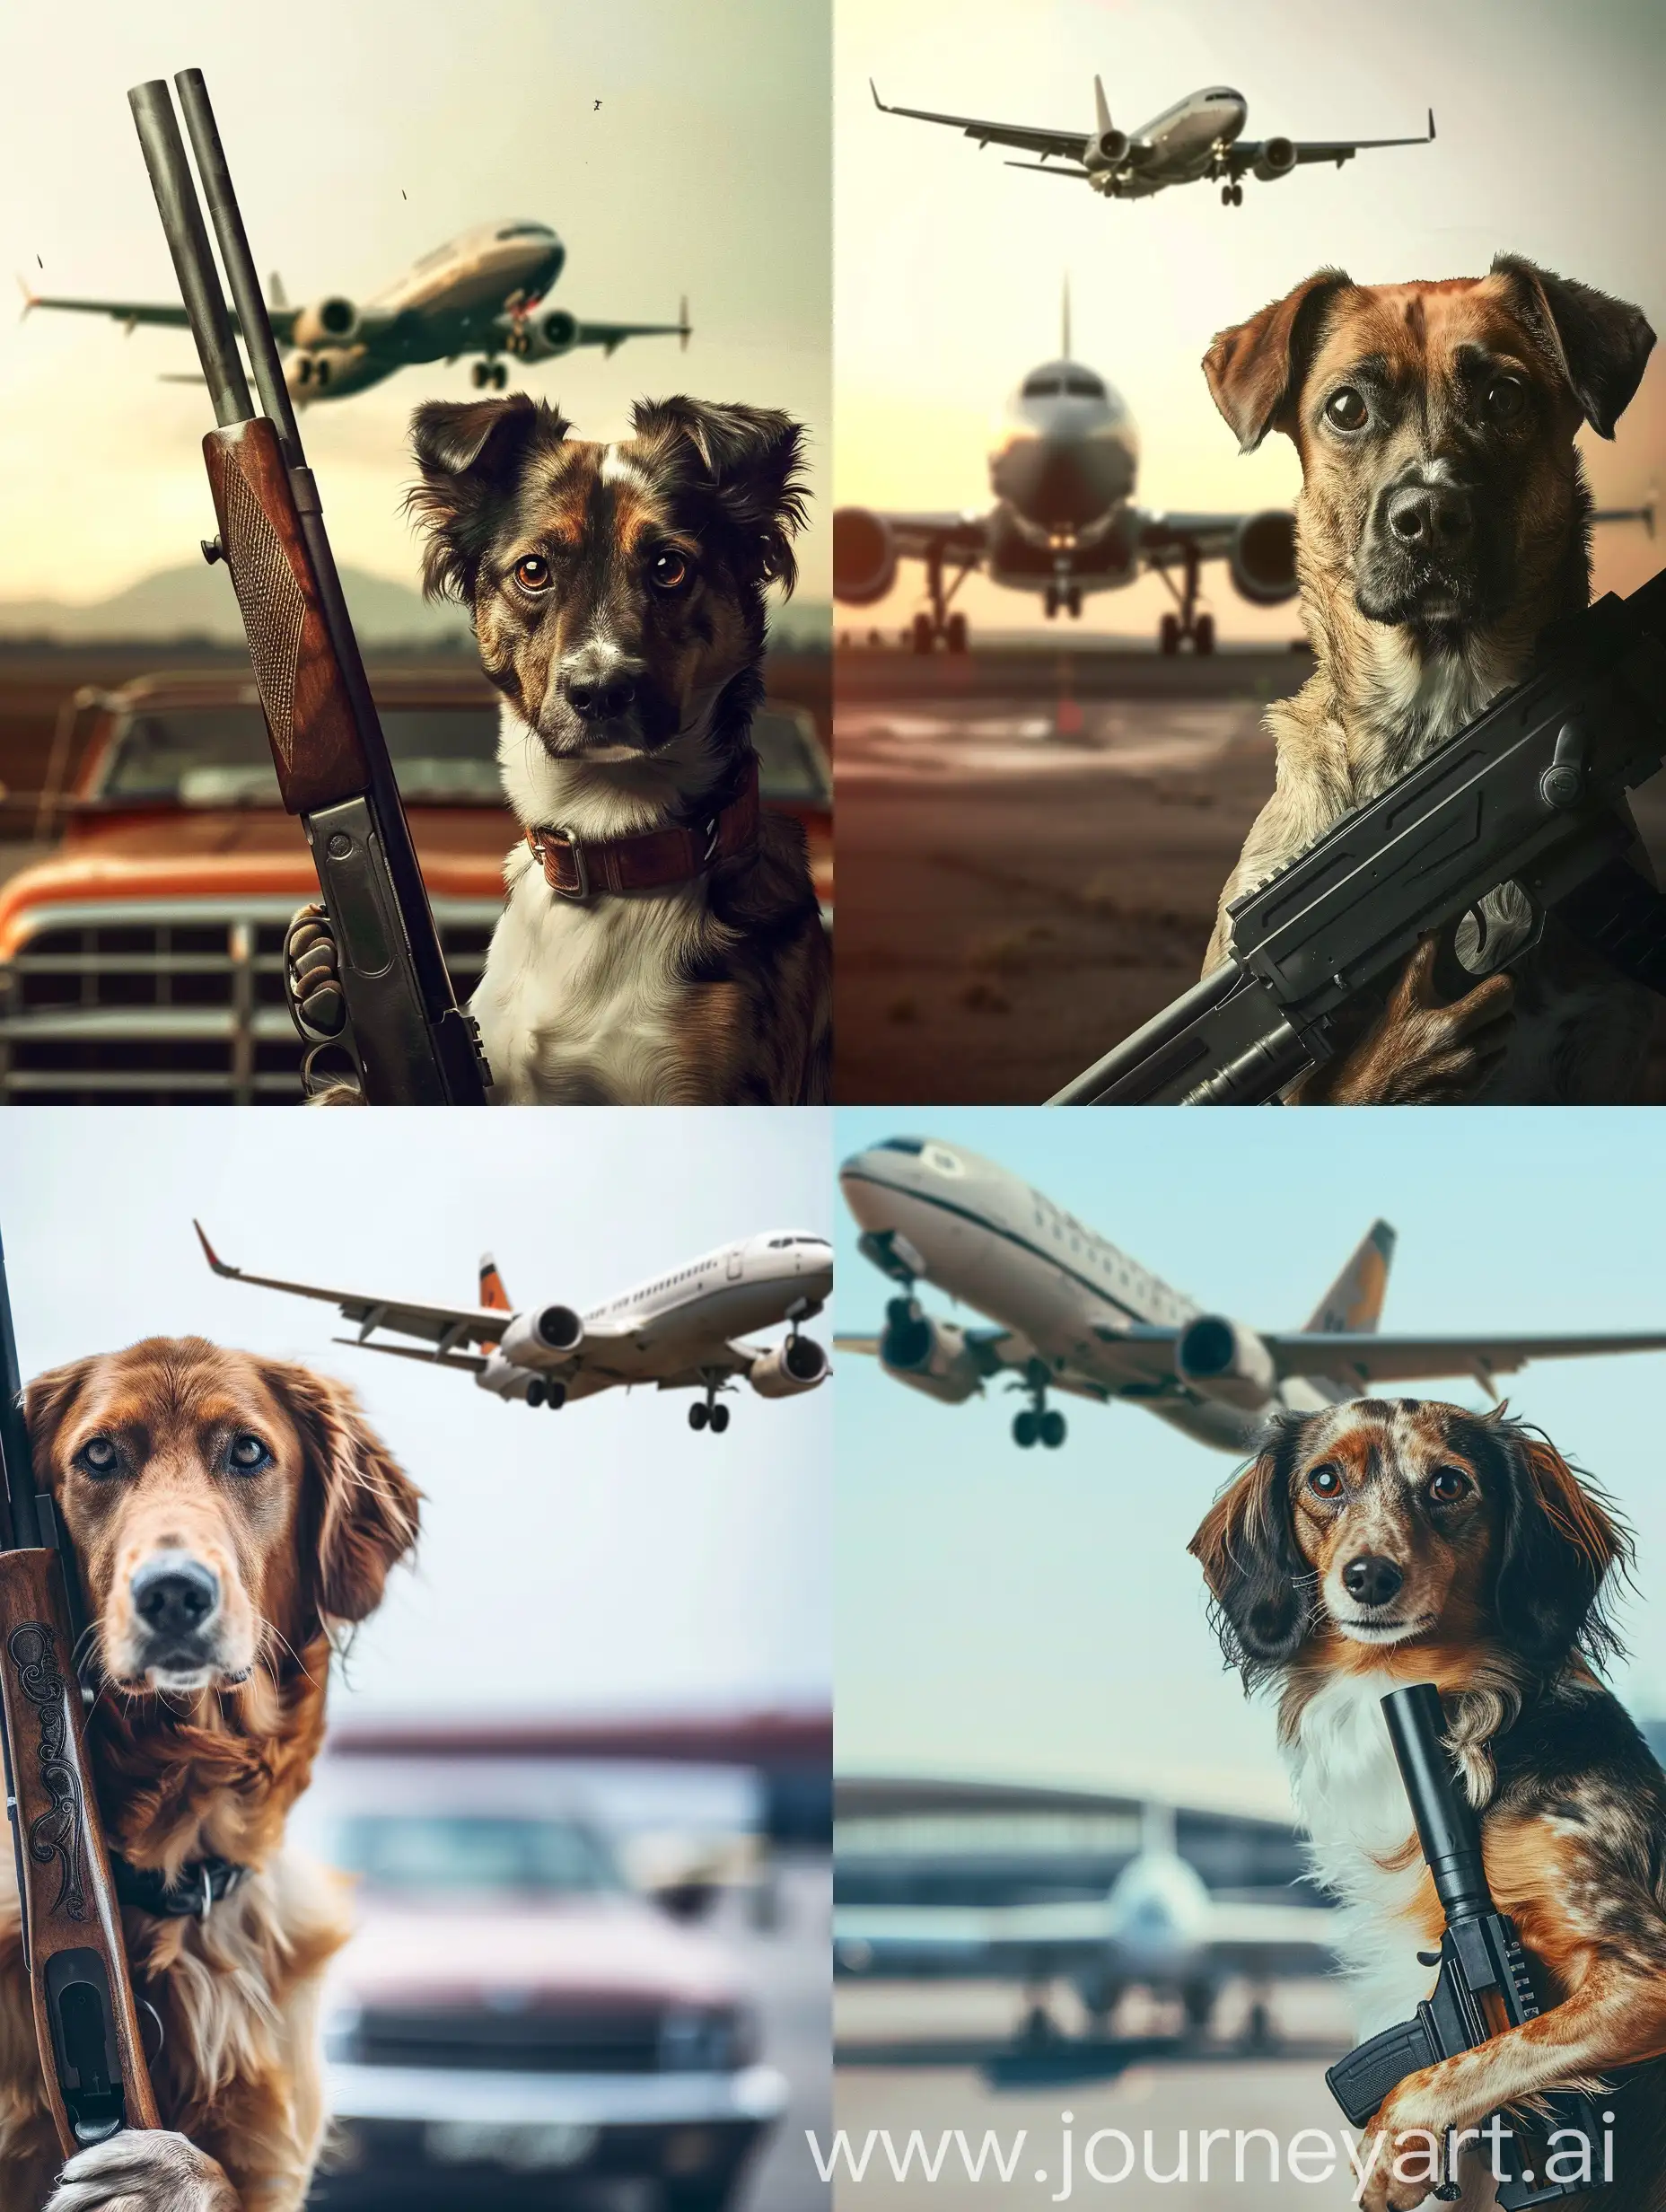 Abstract image of a dog holding a hunting rifle looking at the camera with an airplane in the background